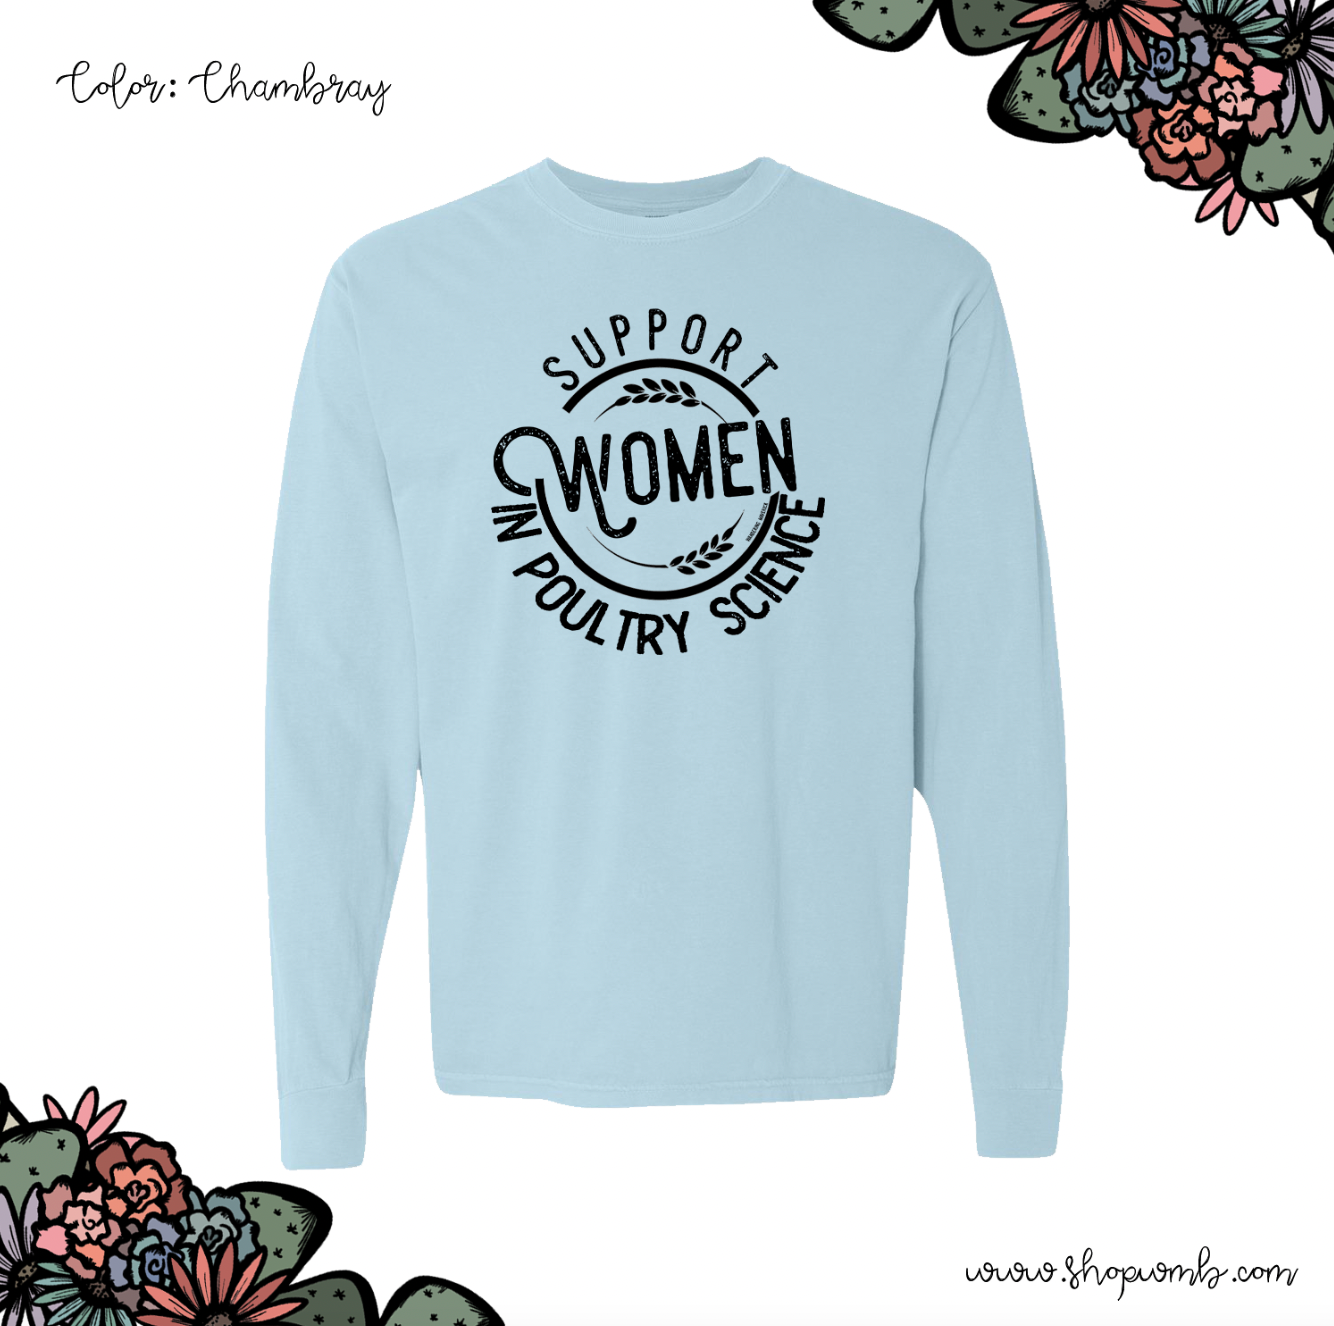 Support Women In Poultry Science LONG SLEEVE T-Shirt (S-3XL) - Multiple Colors!